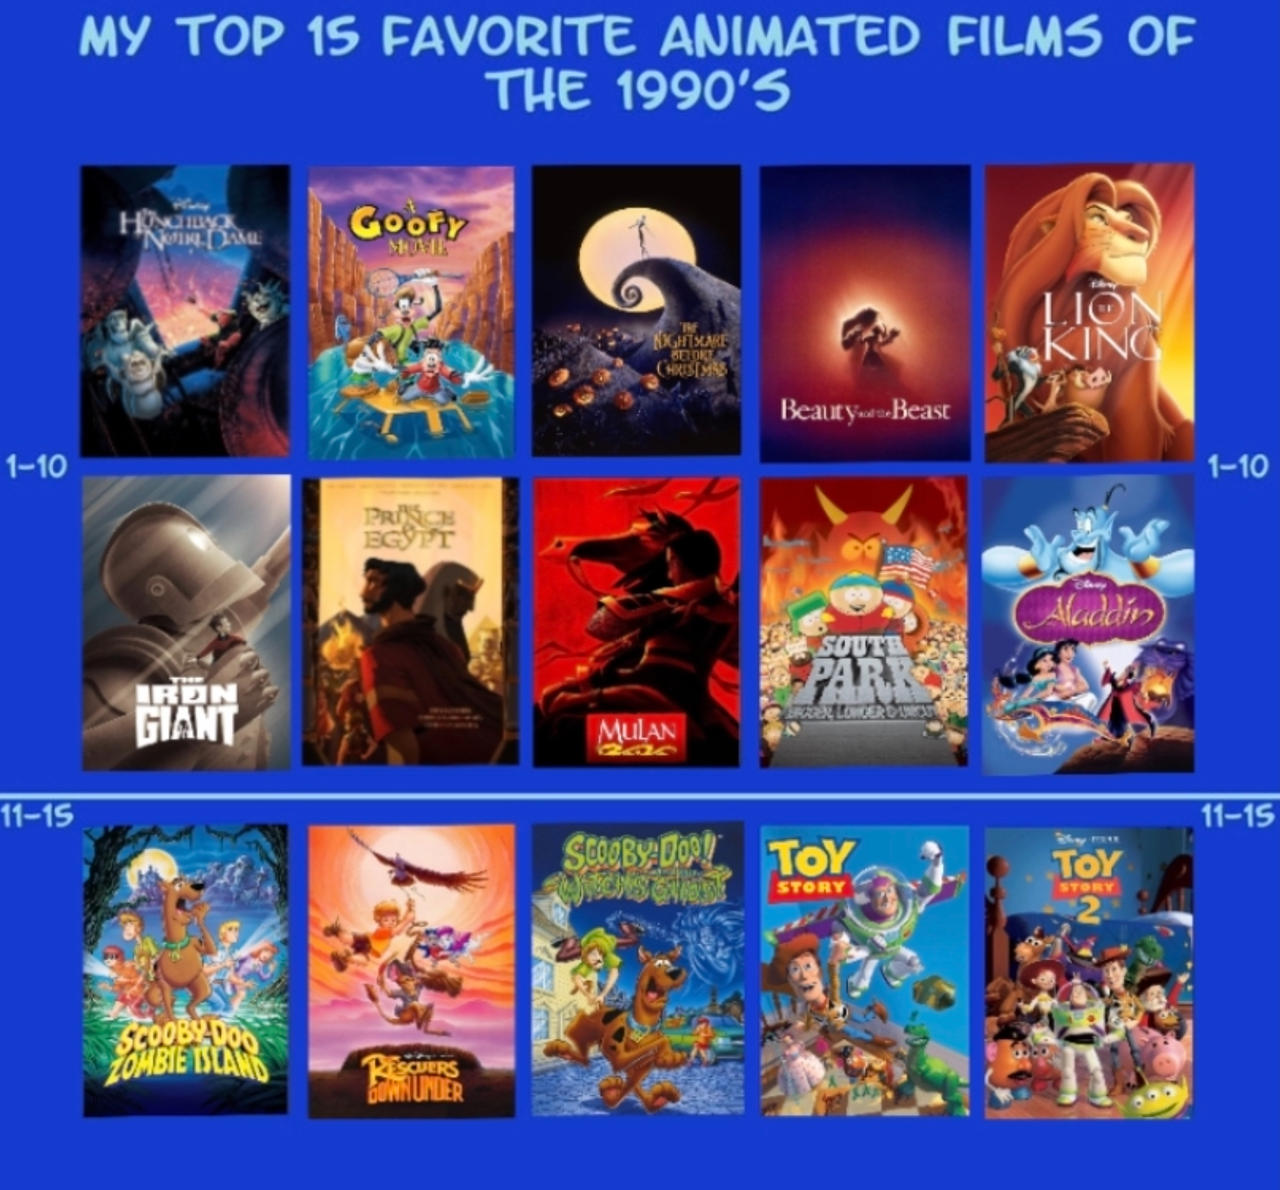 Top 15 animated films of the 1990s by jallroynoy on DeviantArt